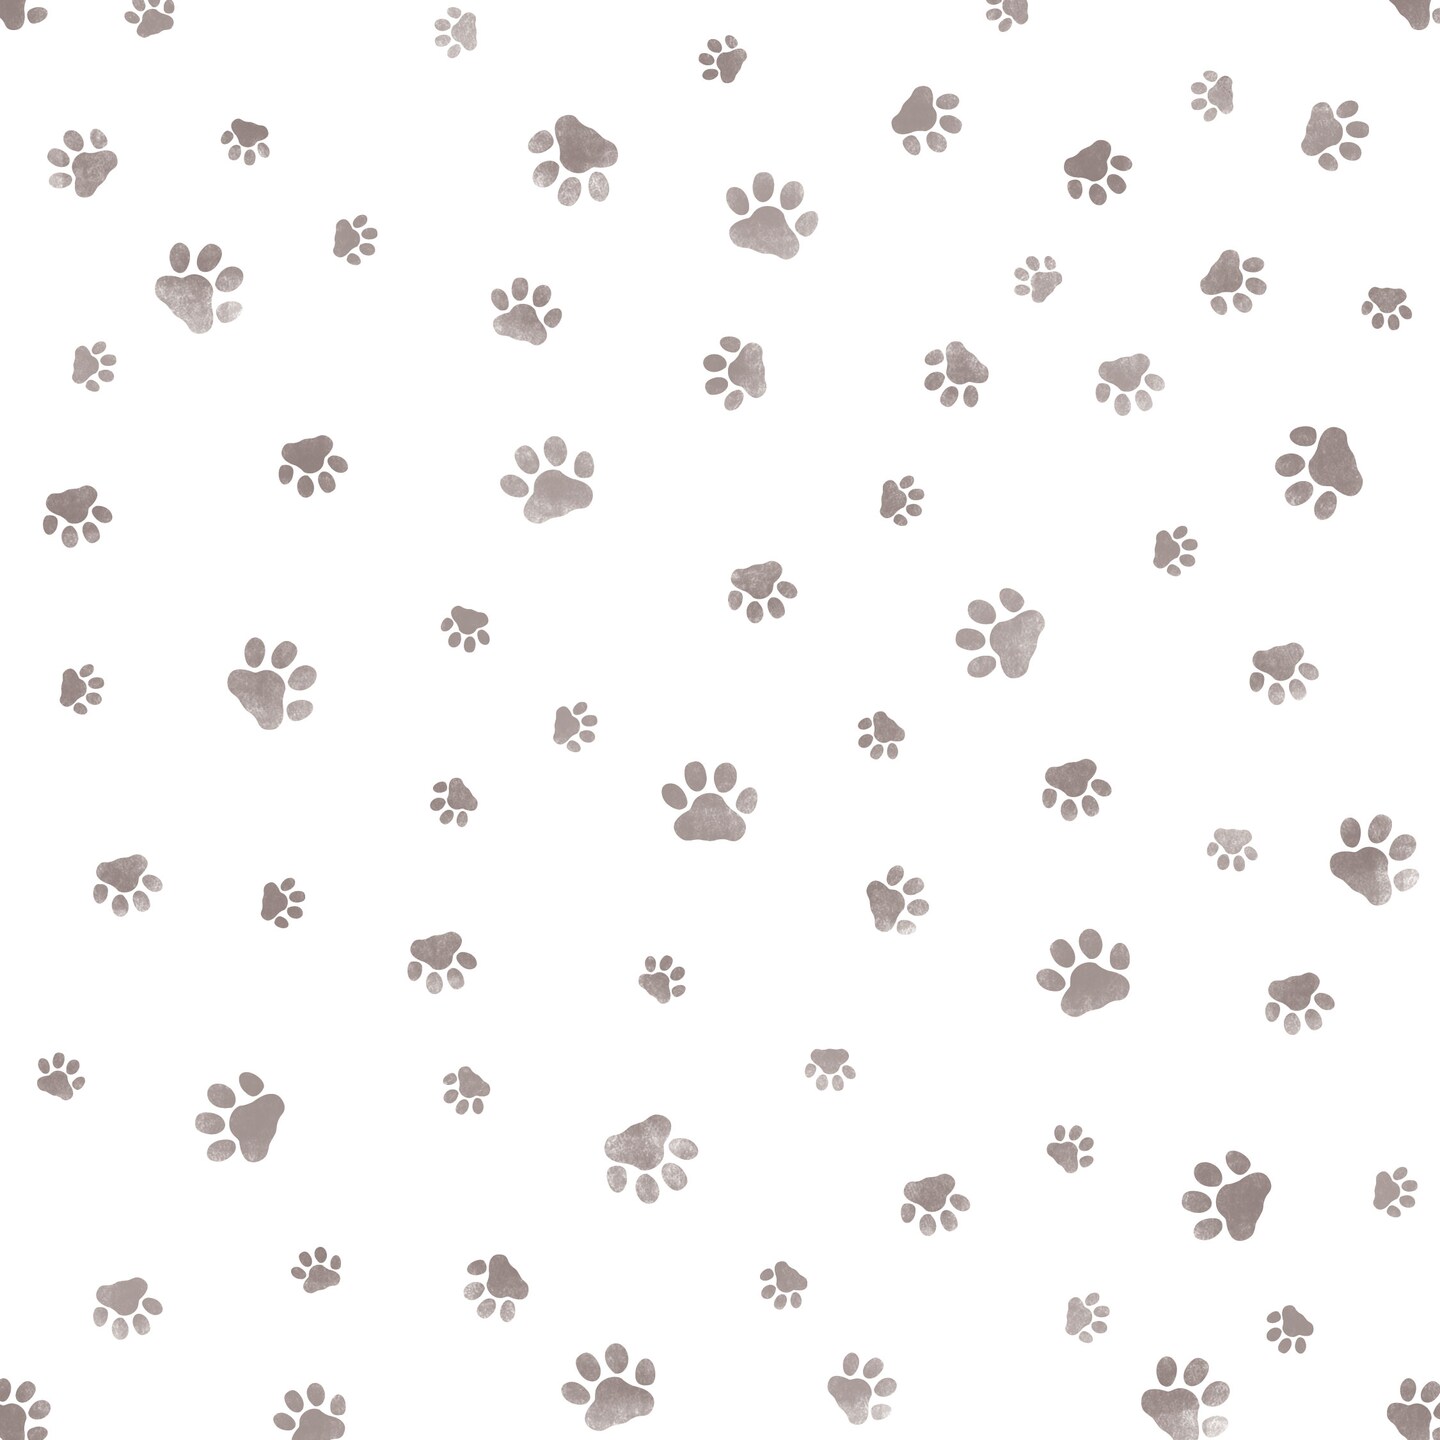 124016 Paw Print Backgrounds Images Stock Photos  Vectors  Shutterstock